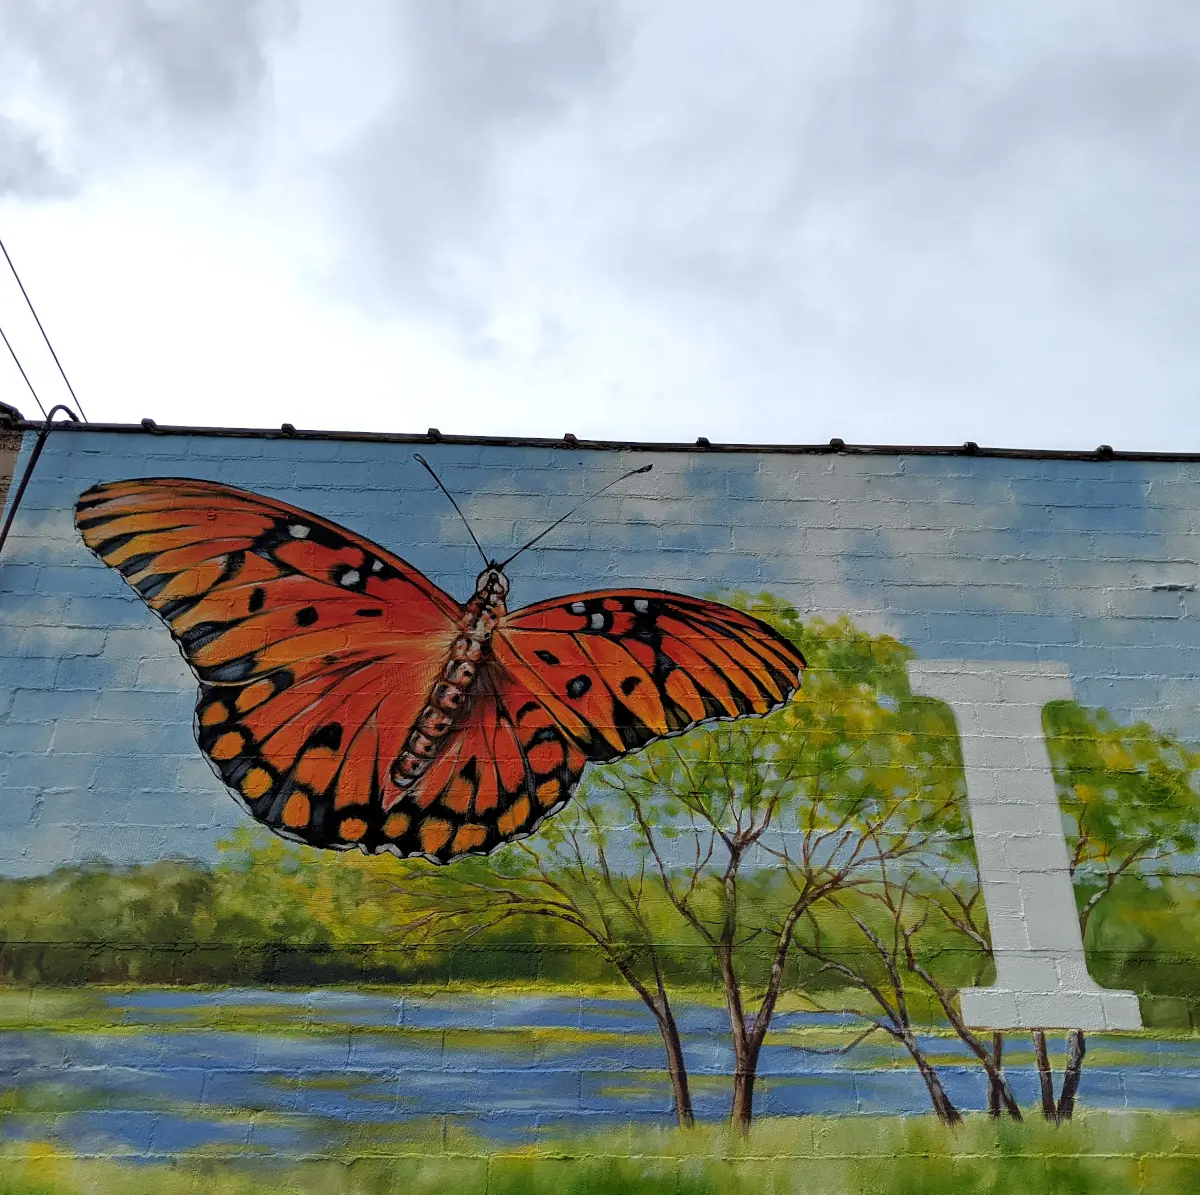 Butterfly on Arts District Mural